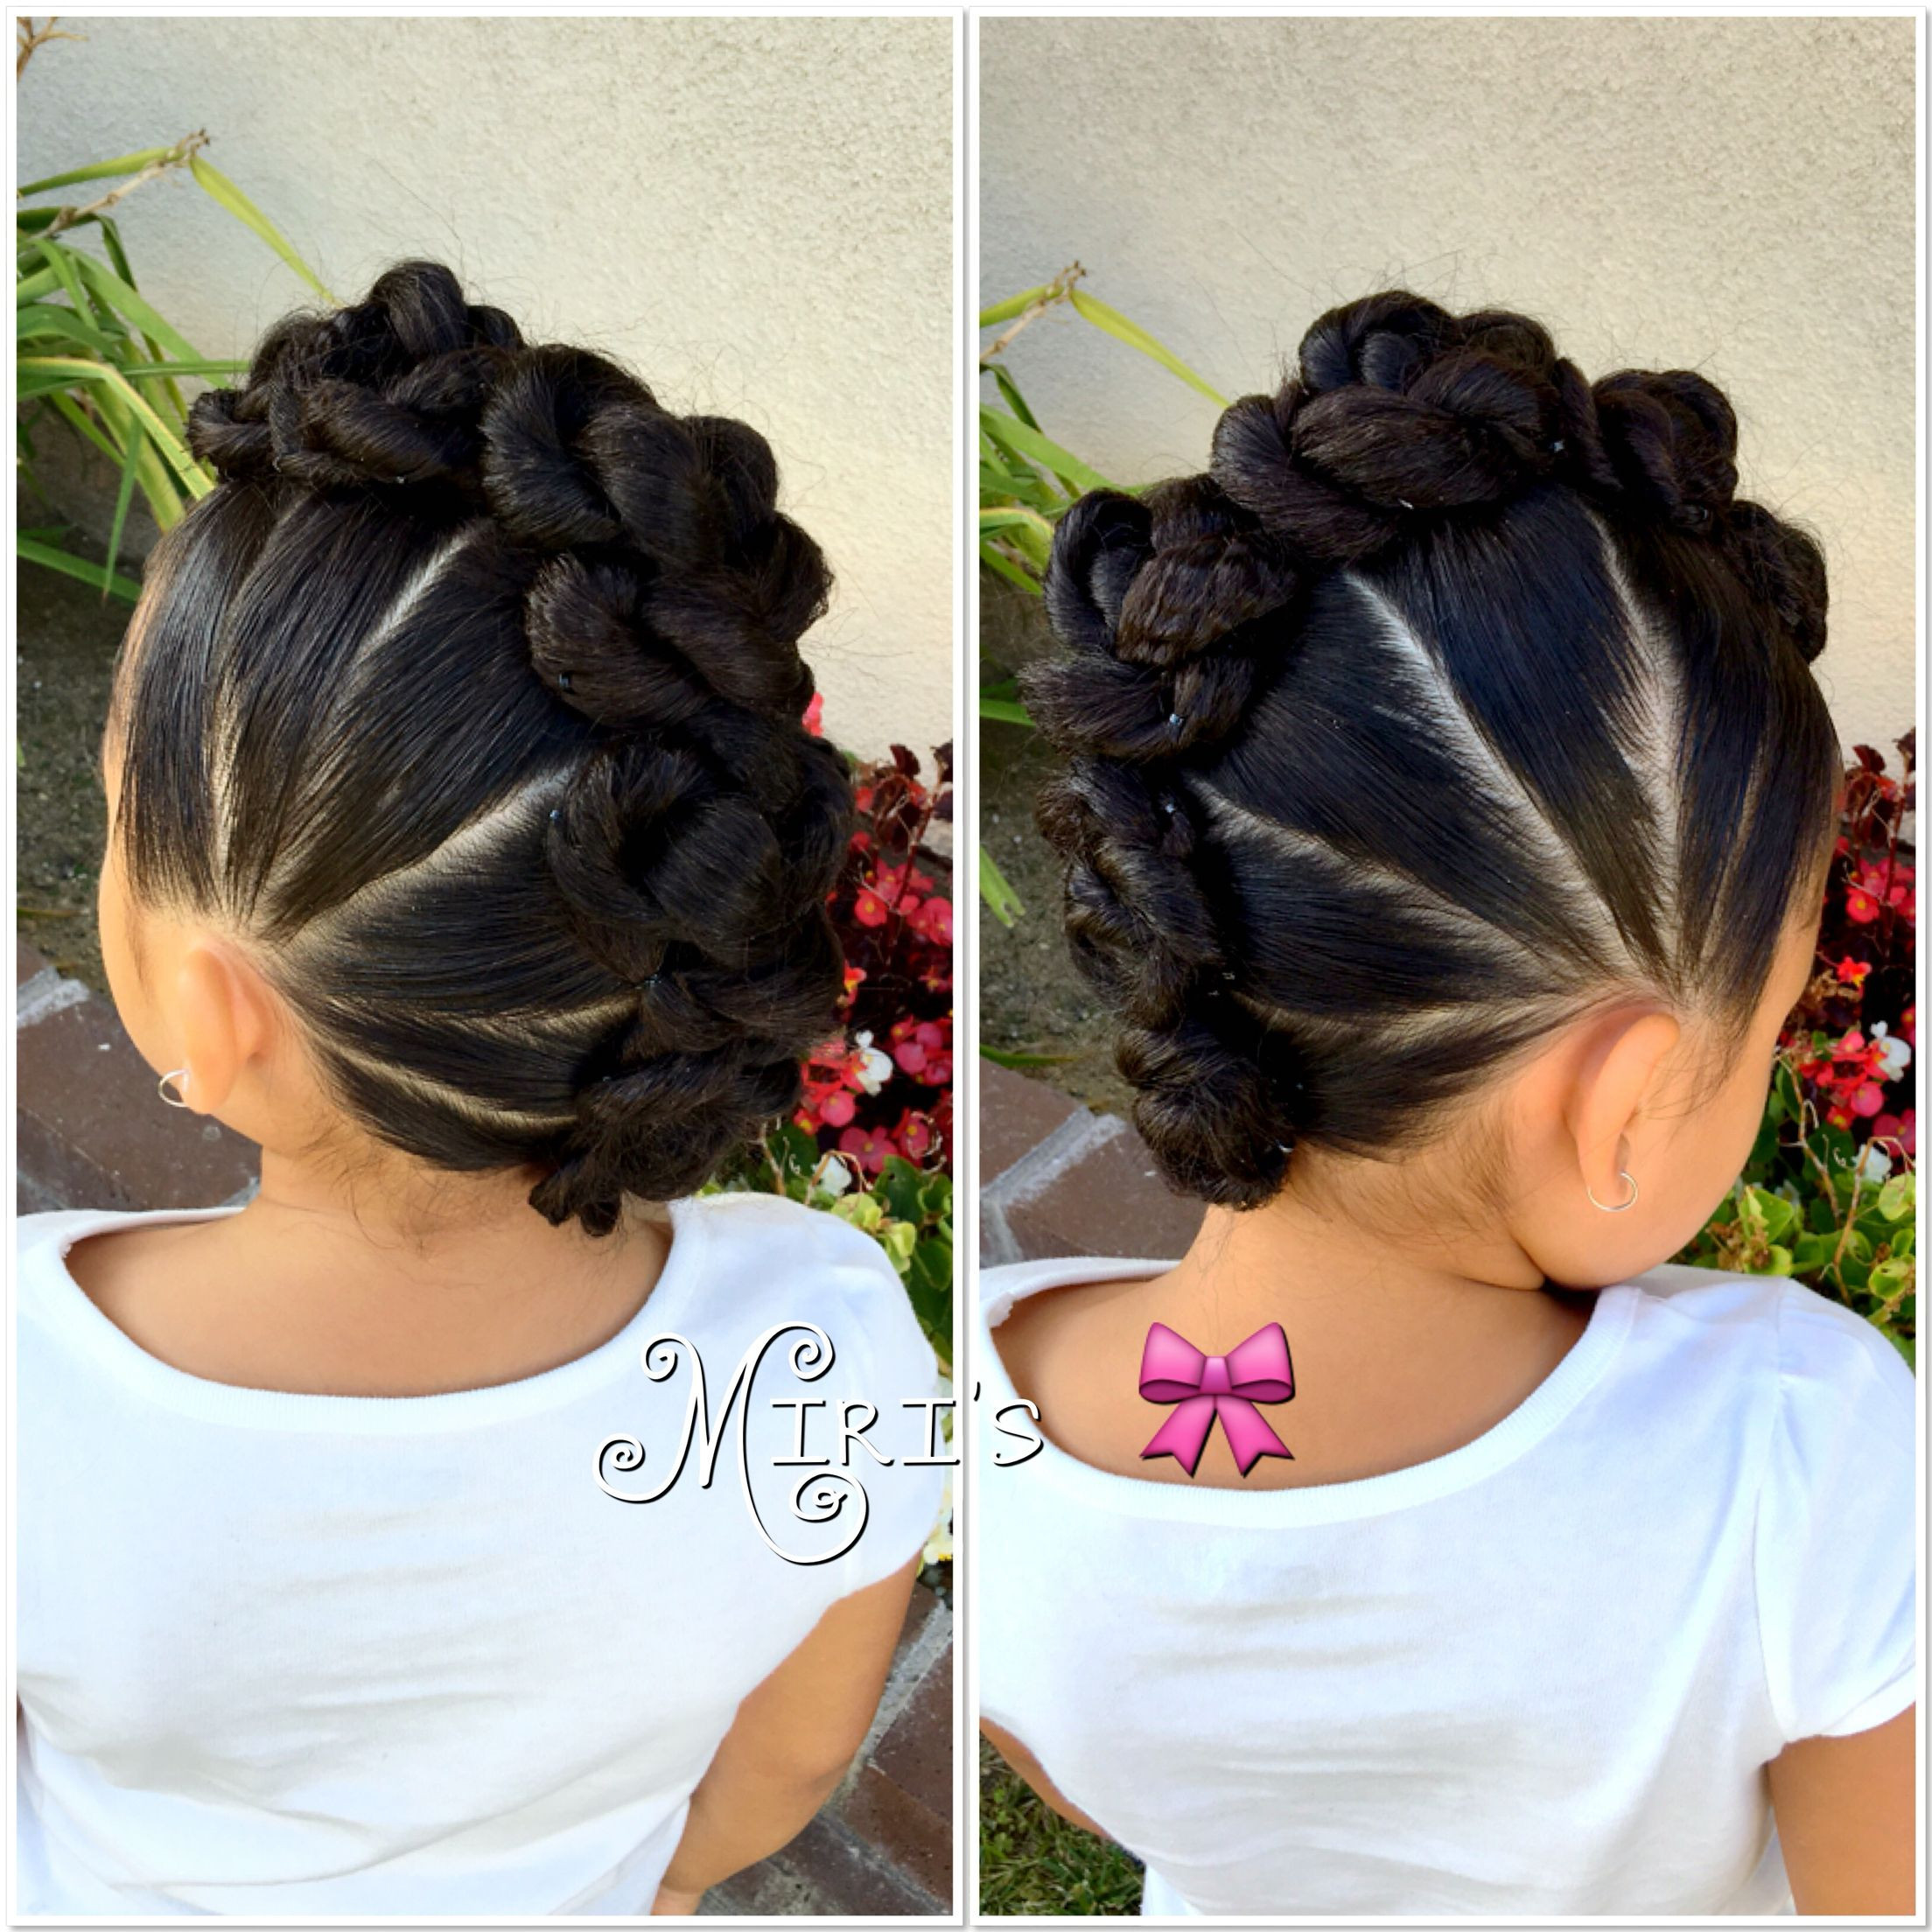 Mohawk Hairstyles For Little Girl
 Mohawk with twists hair style for little girls